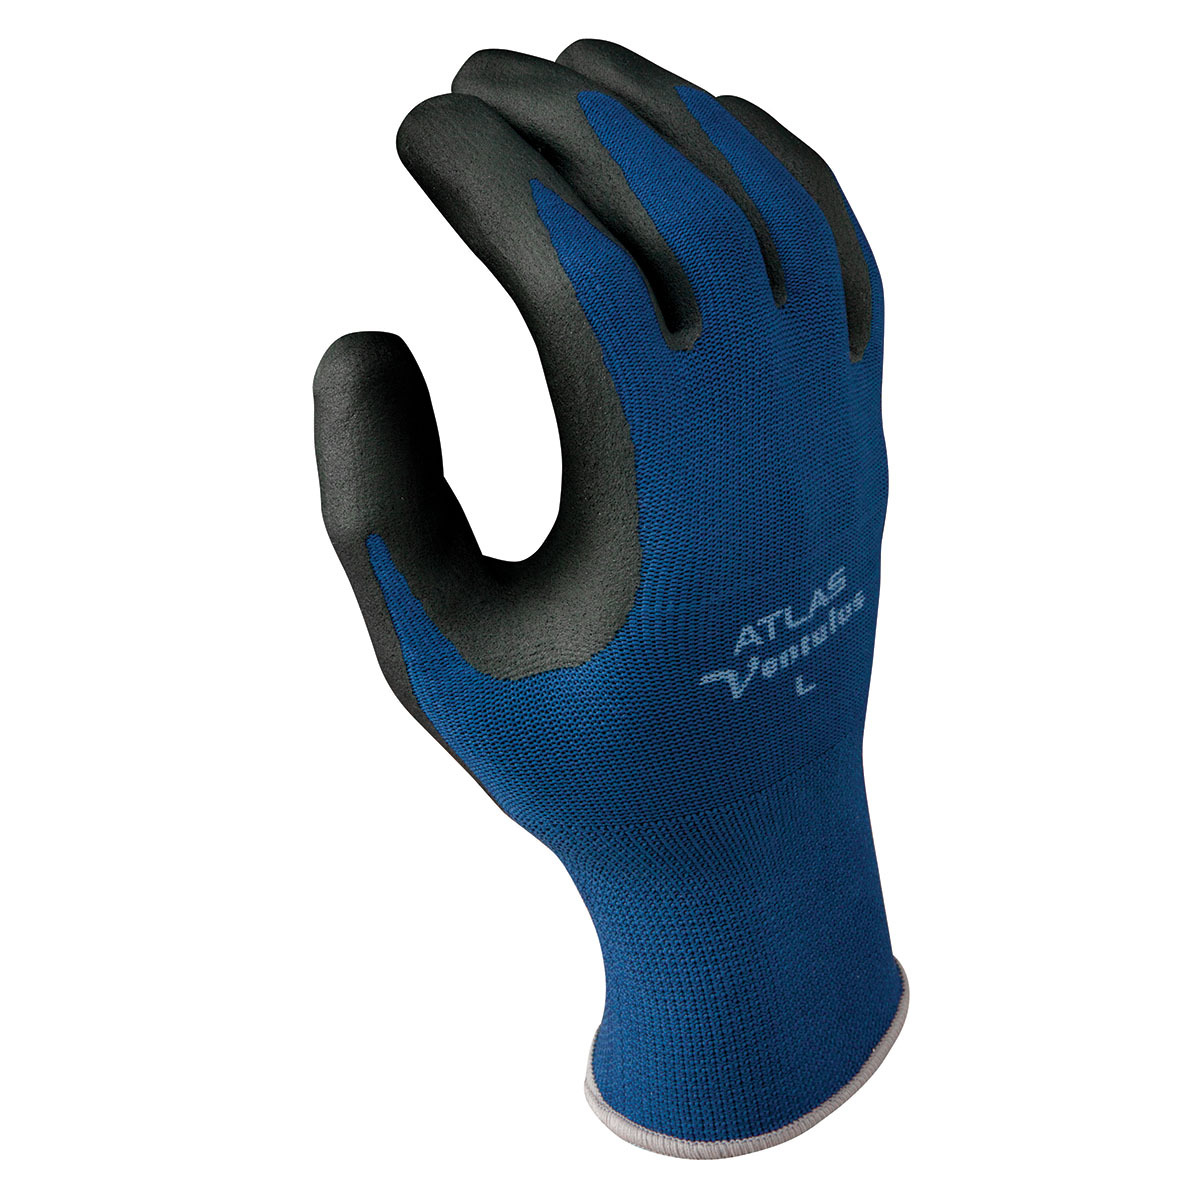 SHOWA® Size 9 13 Gauge Foam Nitrile Palm Coated Work Gloves With Seamless Knit Liner And Knit Wrist